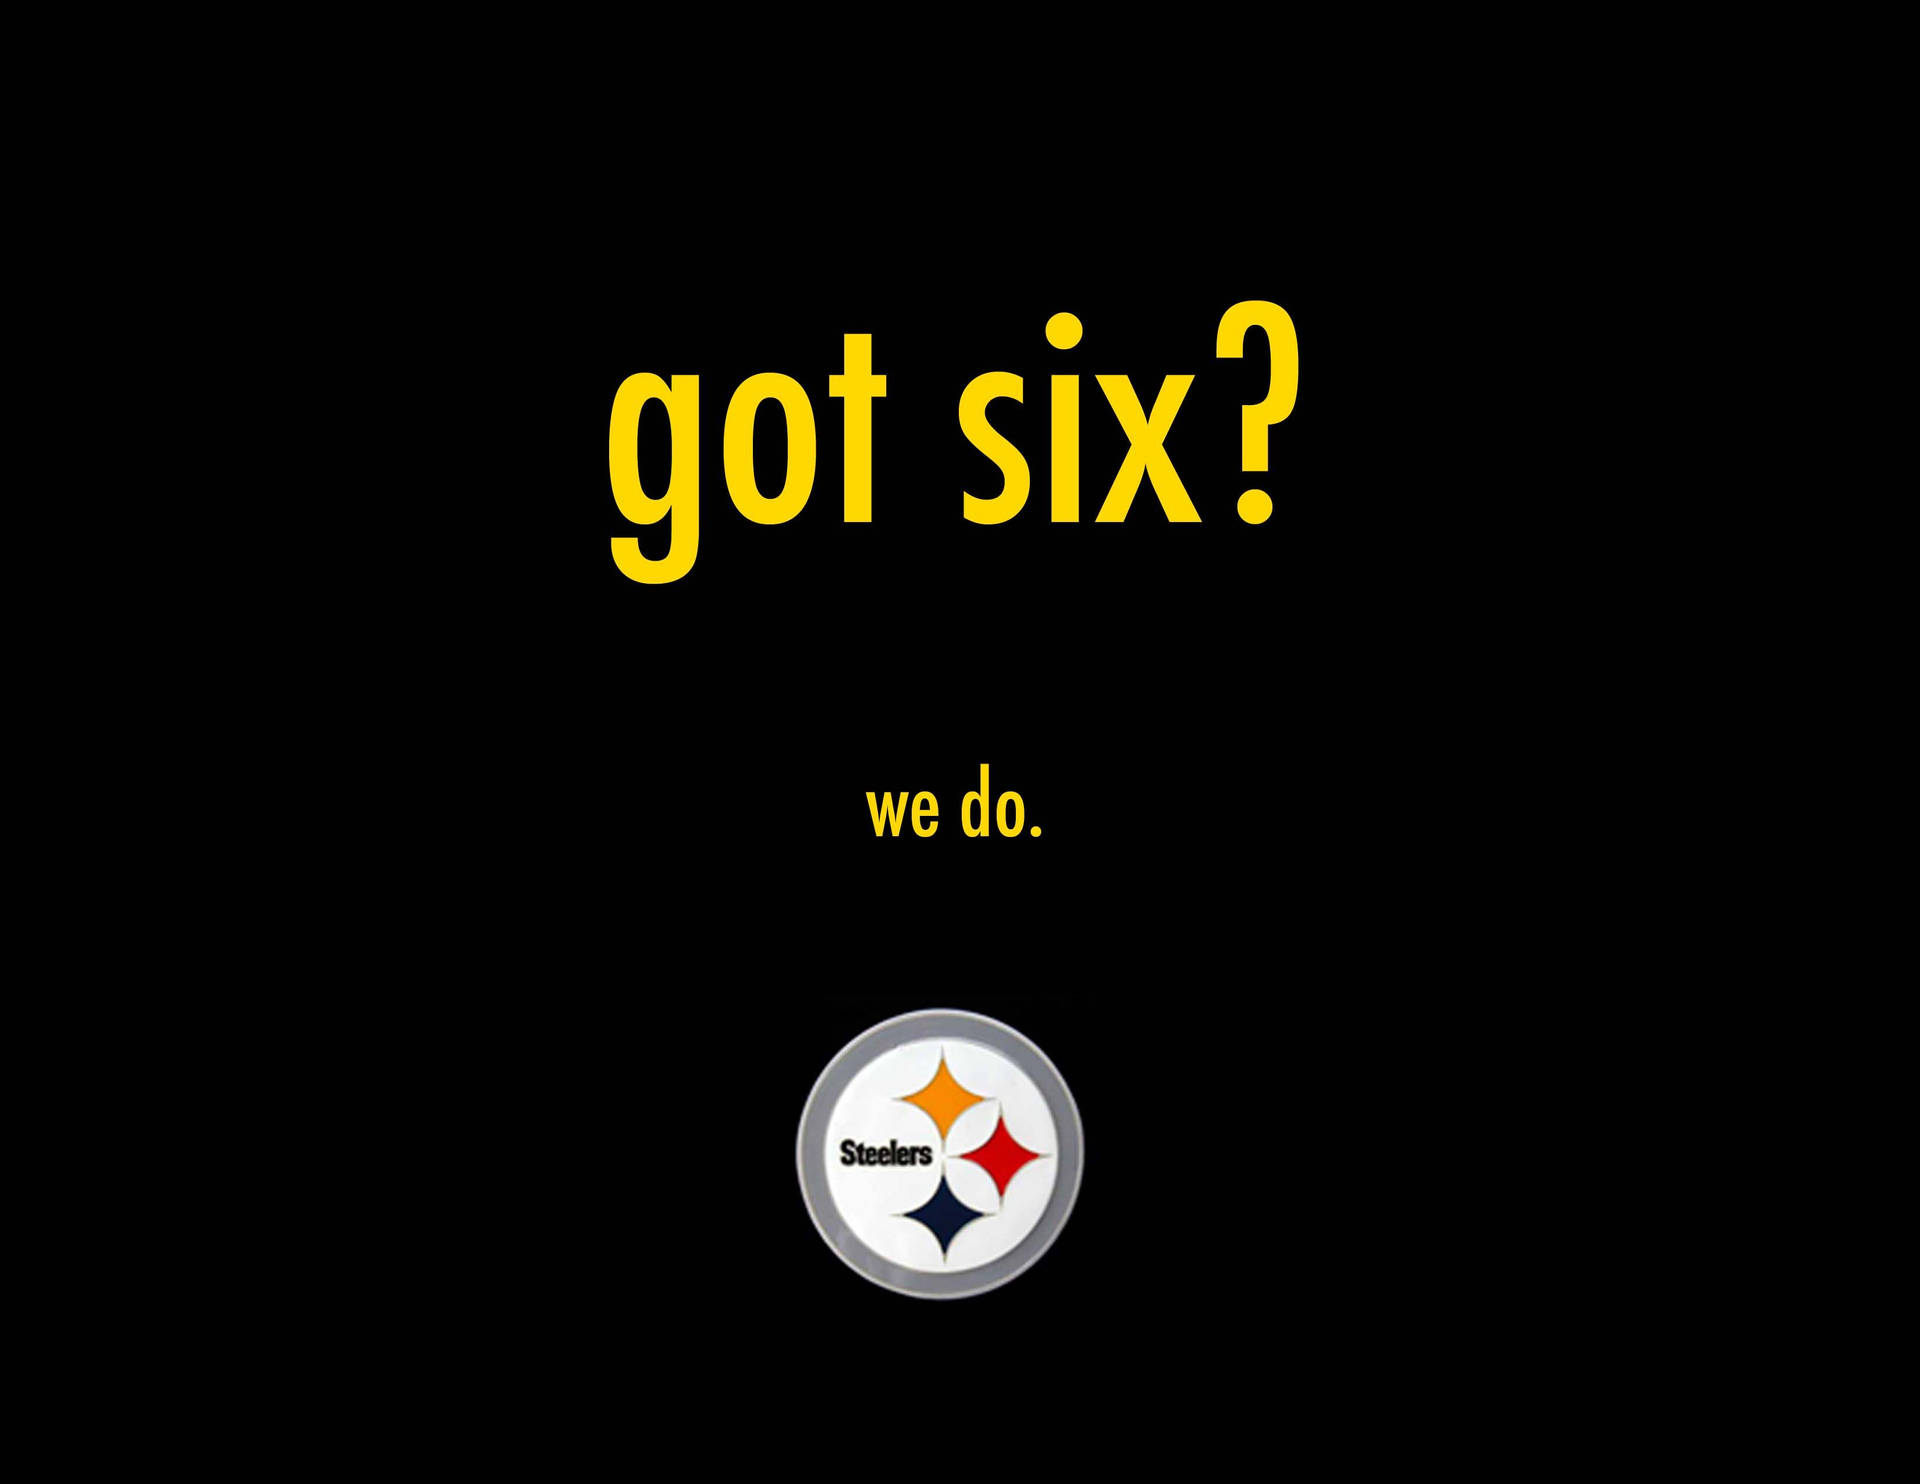 Free Steelers Wallpaper Downloads, [100+] Steelers Wallpapers for FREE |  